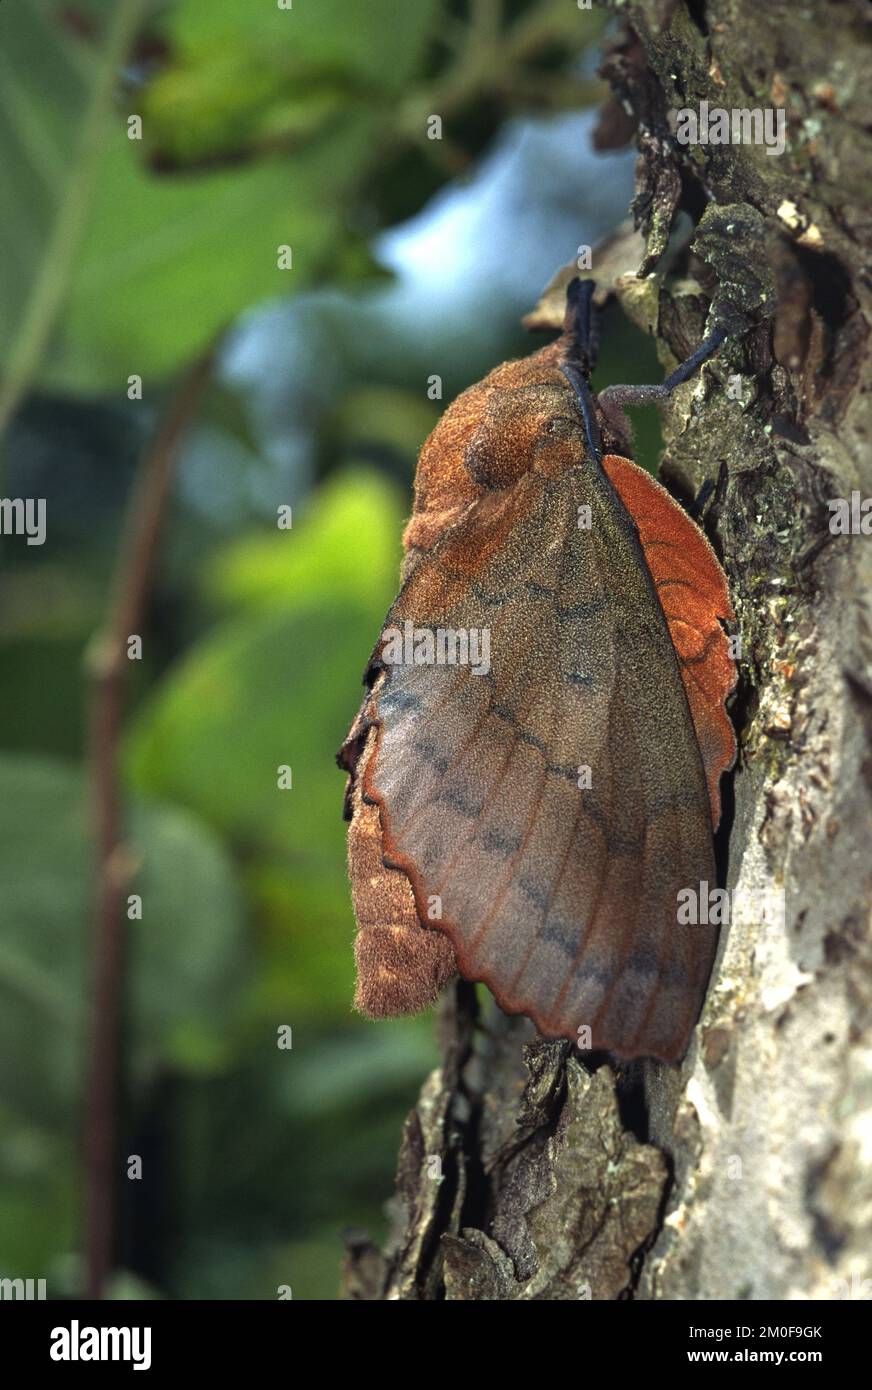 lappet (Gastropacha quercifolia, Phalaena quercifolia), sits at a tree trunk, Germany Stock Photo